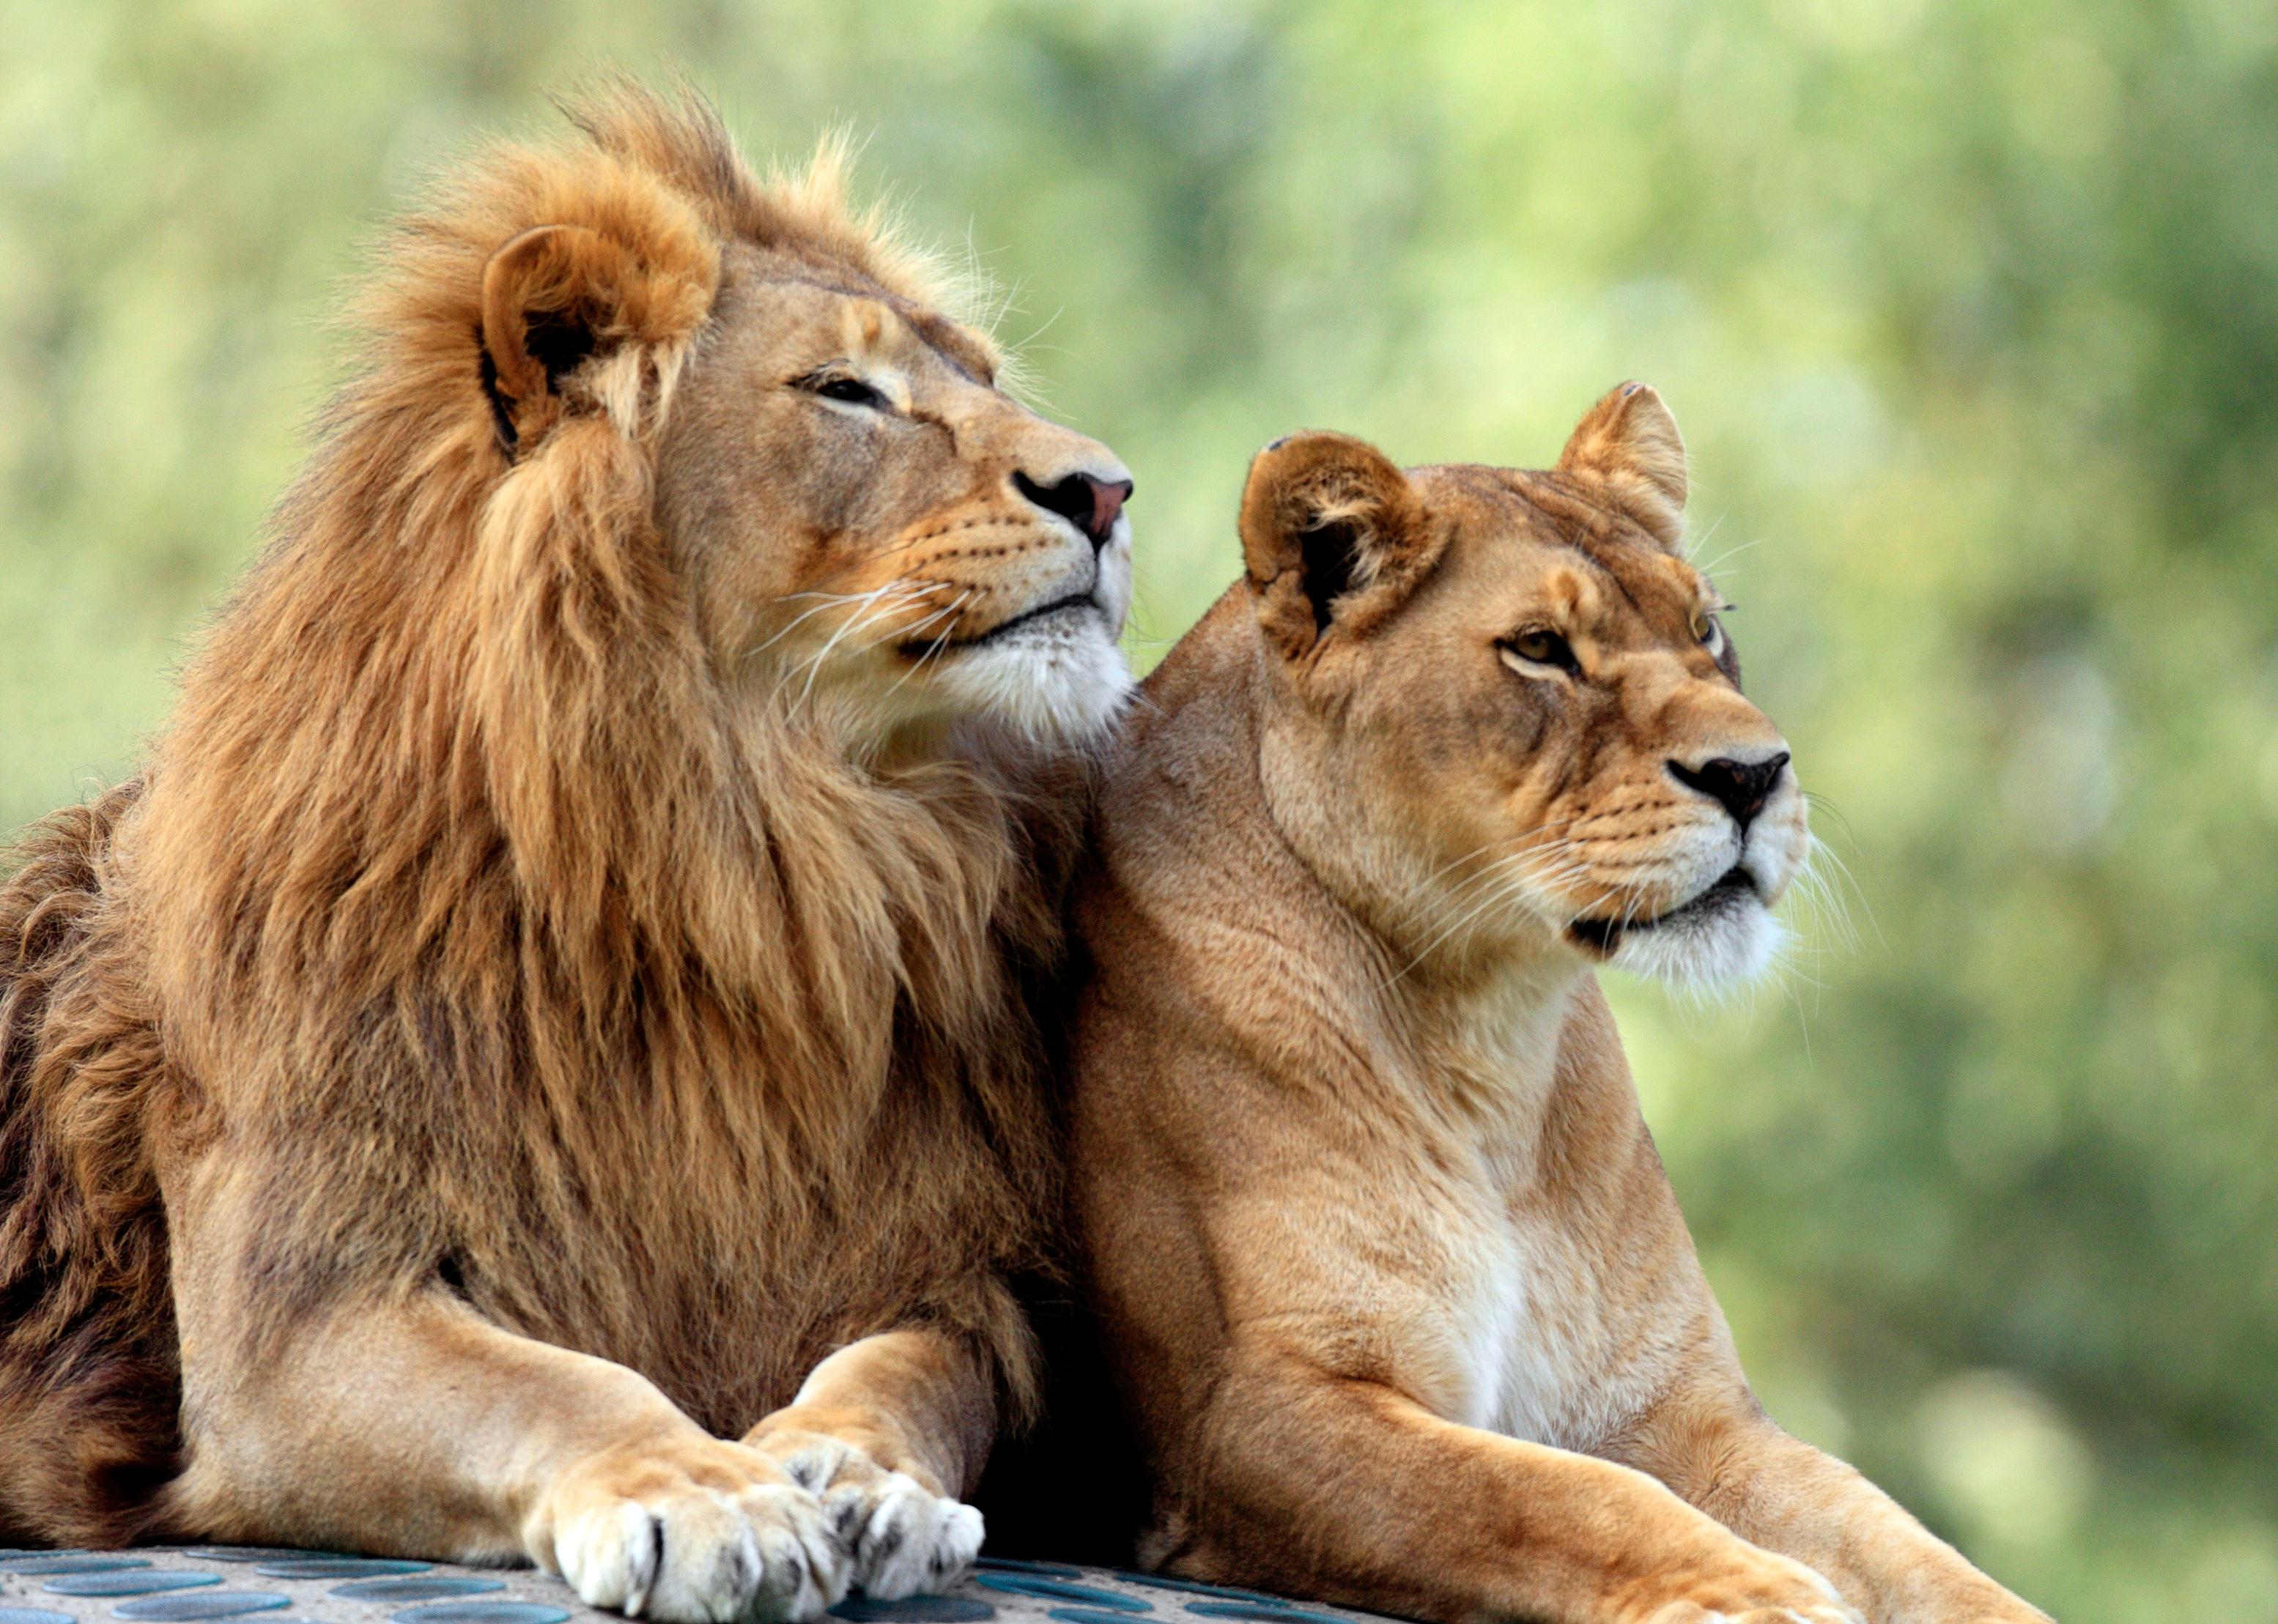 Pair of adult Lions in zoological garden.